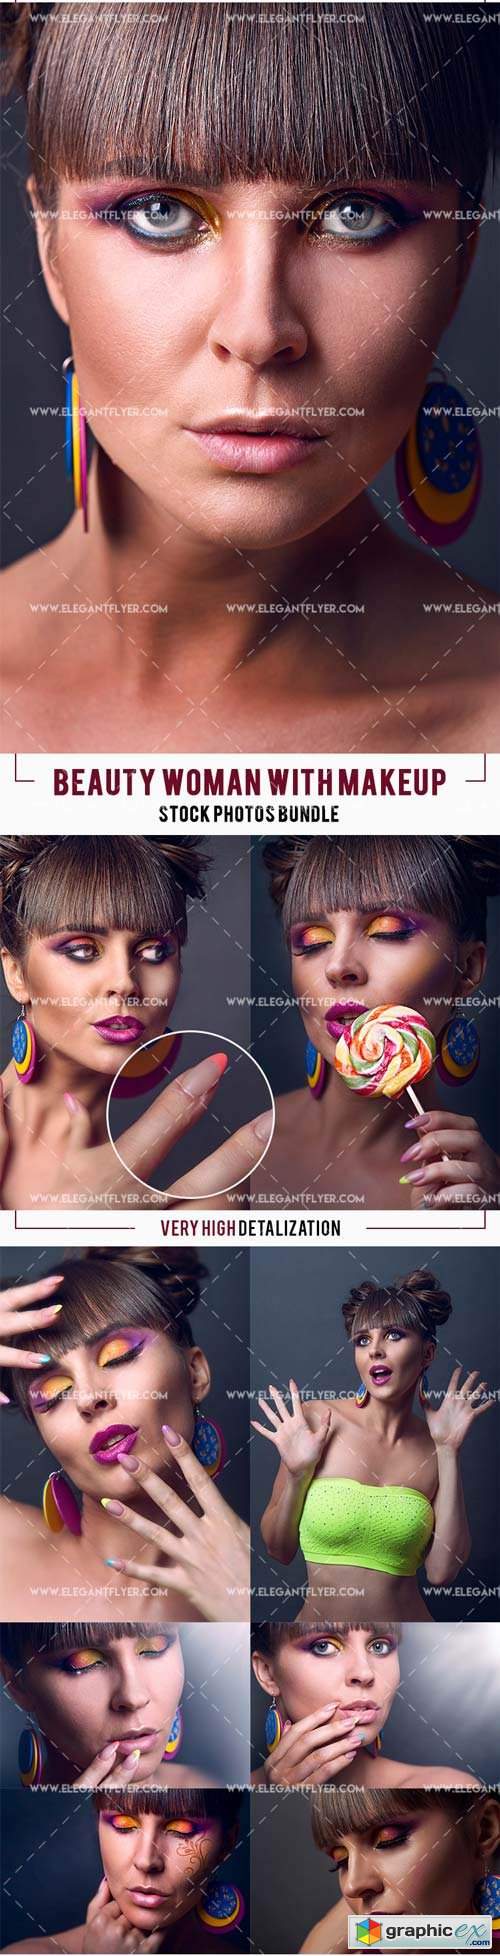 Stock Photos V4 2018 Bundle of Beauty Woman with Makeup – Beauty Girl’s Face